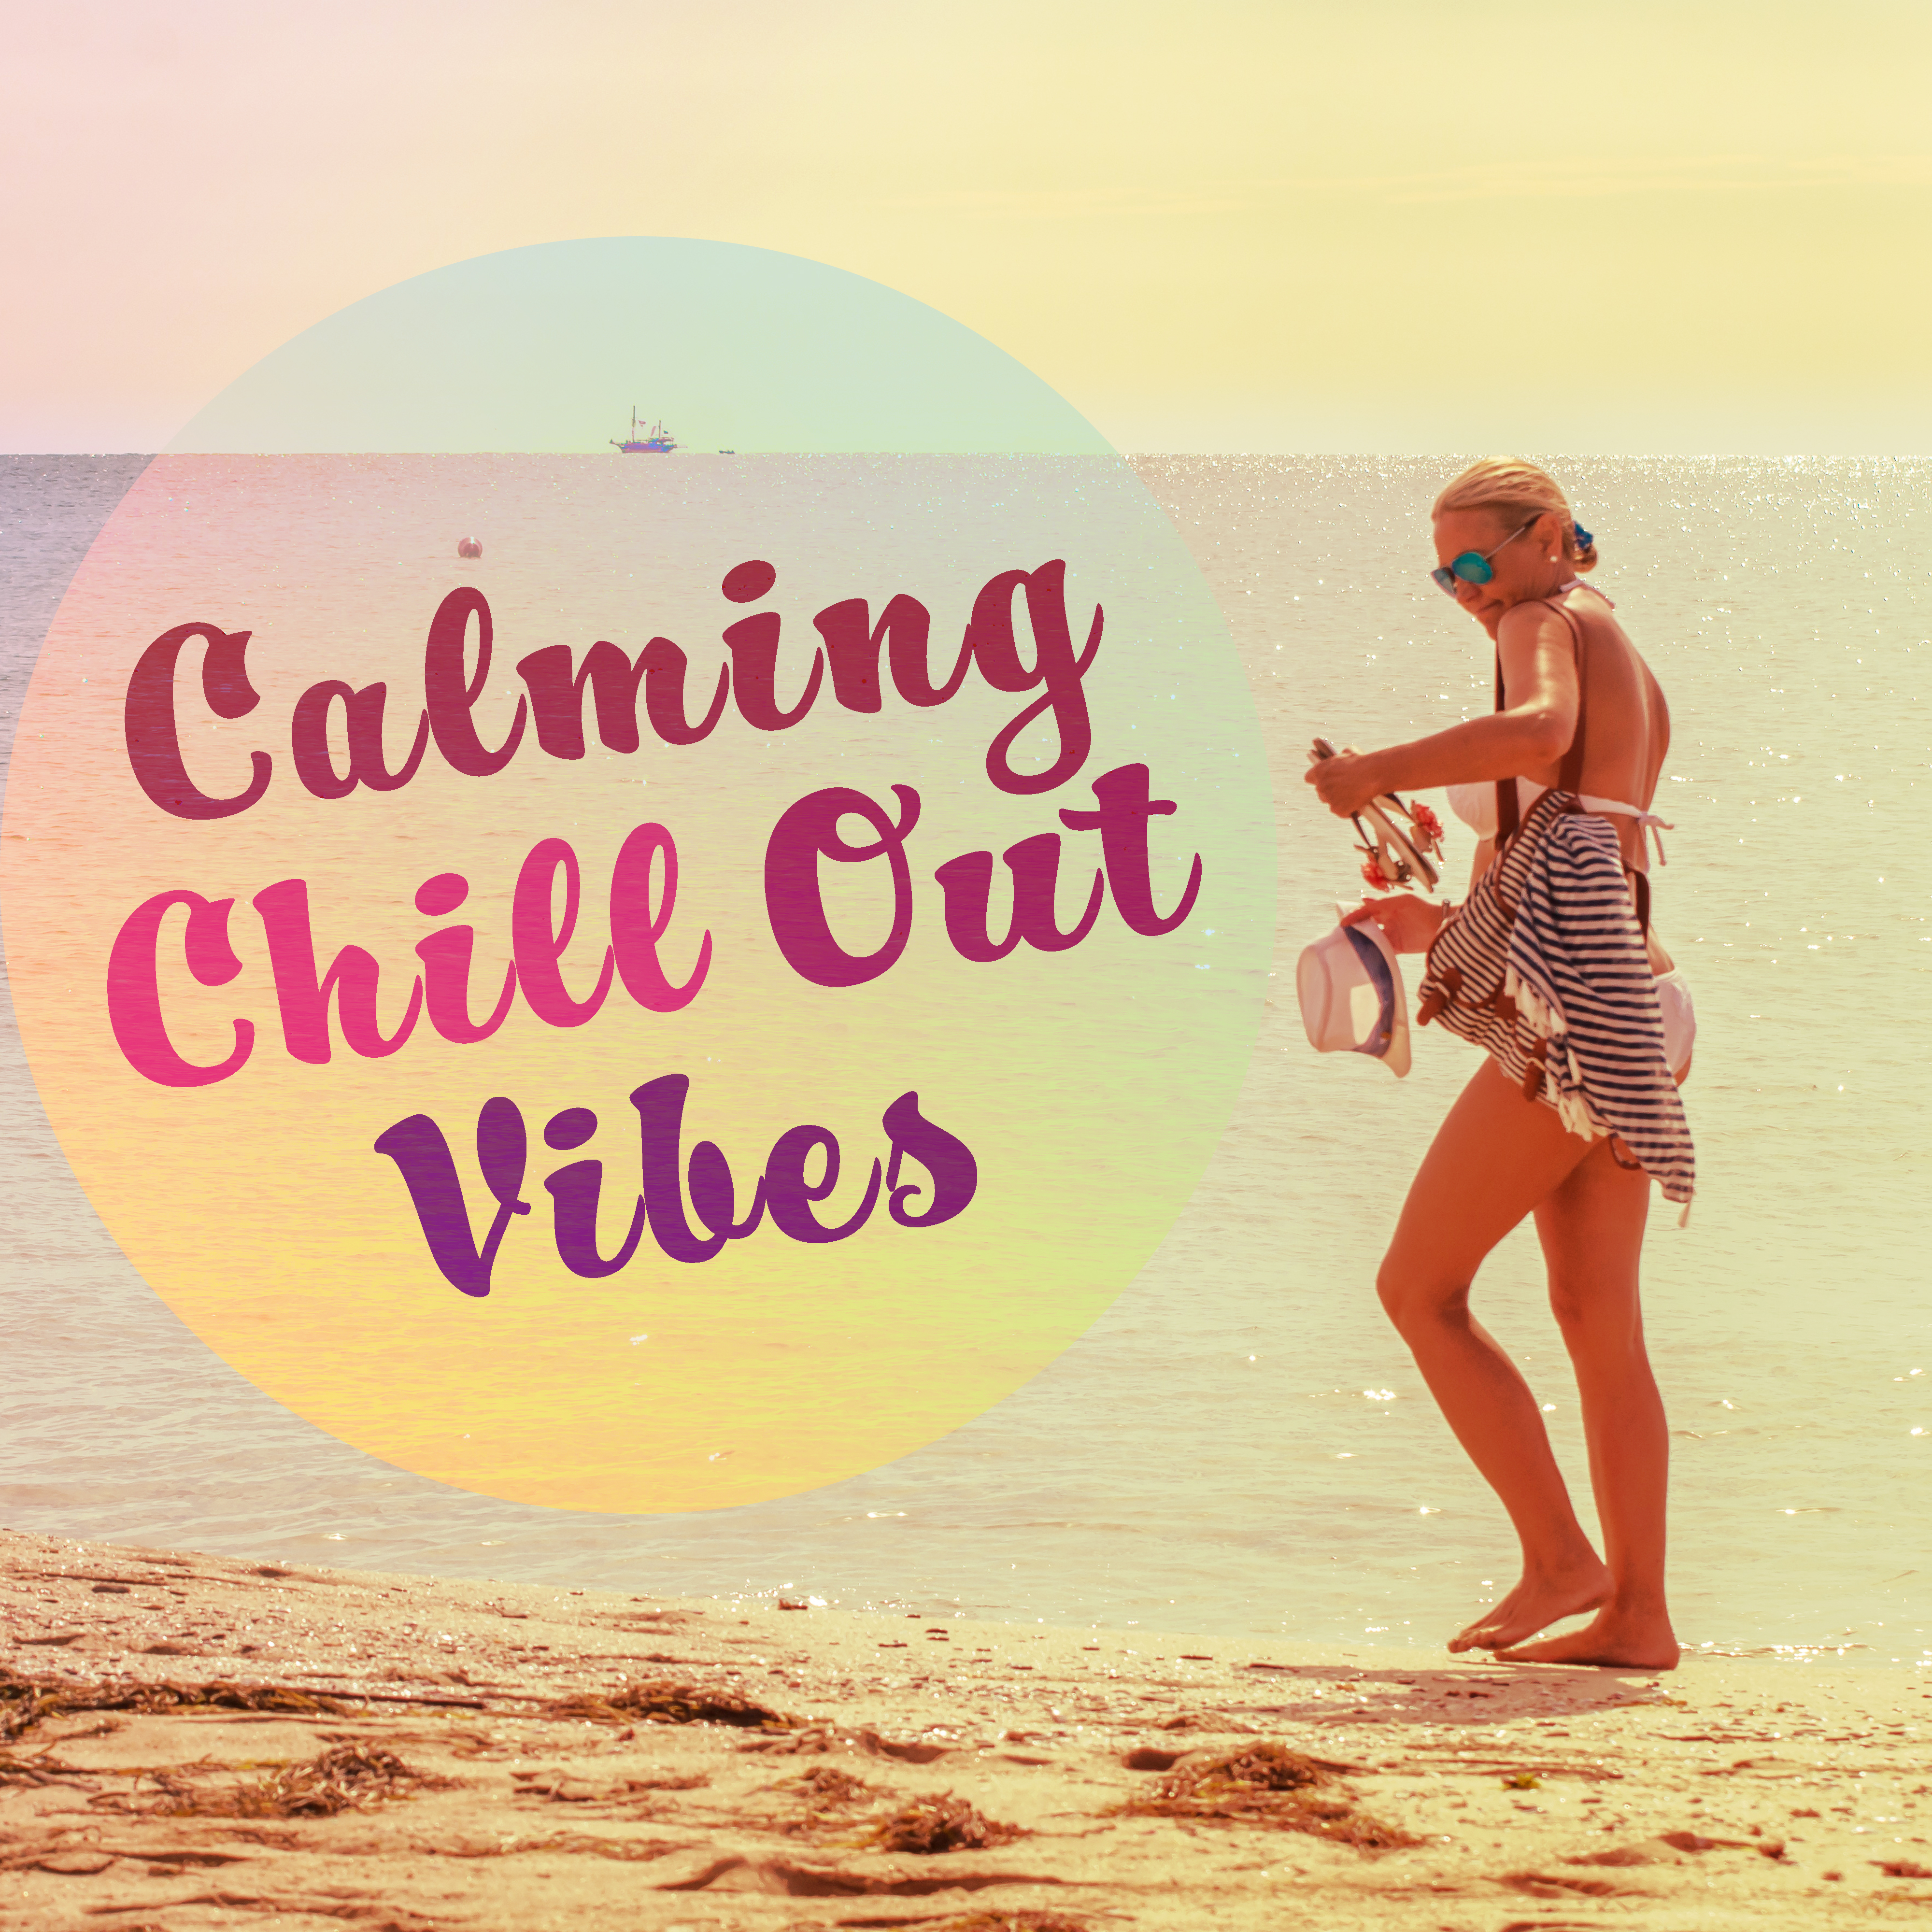 Calming Chill Out Vibes  Holiday Rest, Summer Vibes, Rest with Chill Out Music, Sounds for Journey